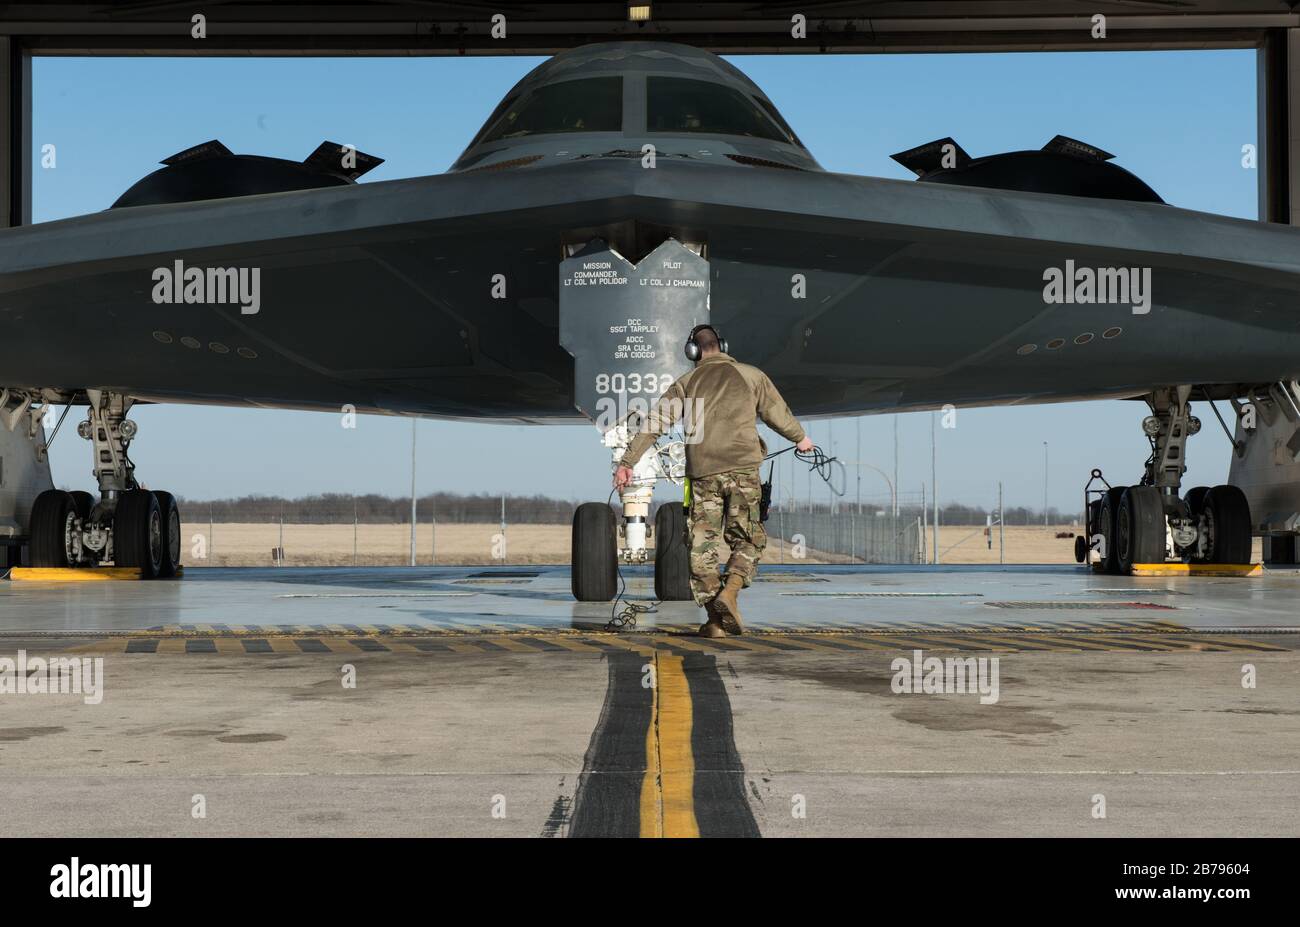 U.S. Air Force Tech. Sgt. Justin Aeckerle, a B-2 Spirit crew chief assigned to the 131st Maintenance Squadron, prepares a B-2 Spirit stealth strategic bomber for departure at Whiteman Air Force Base for relocation to England March 8, 2020 in Knob Noster, Missouri. Stock Photo